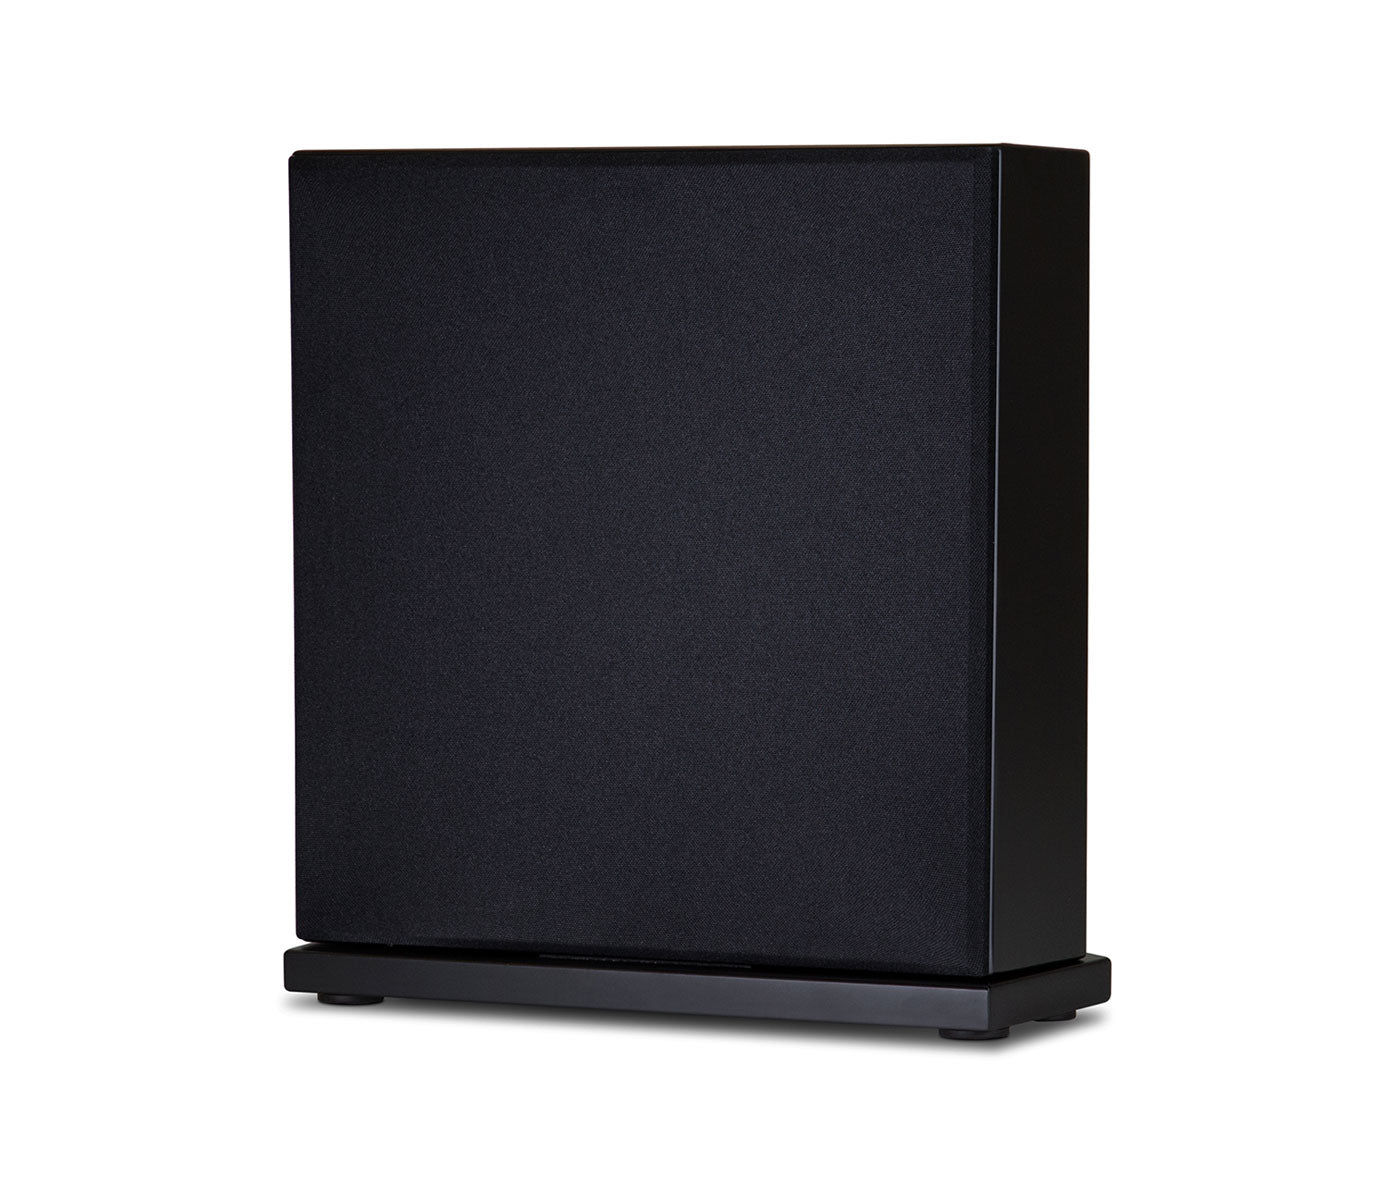 PSB CSIR SUB IN-ROOM SUBWOOFER